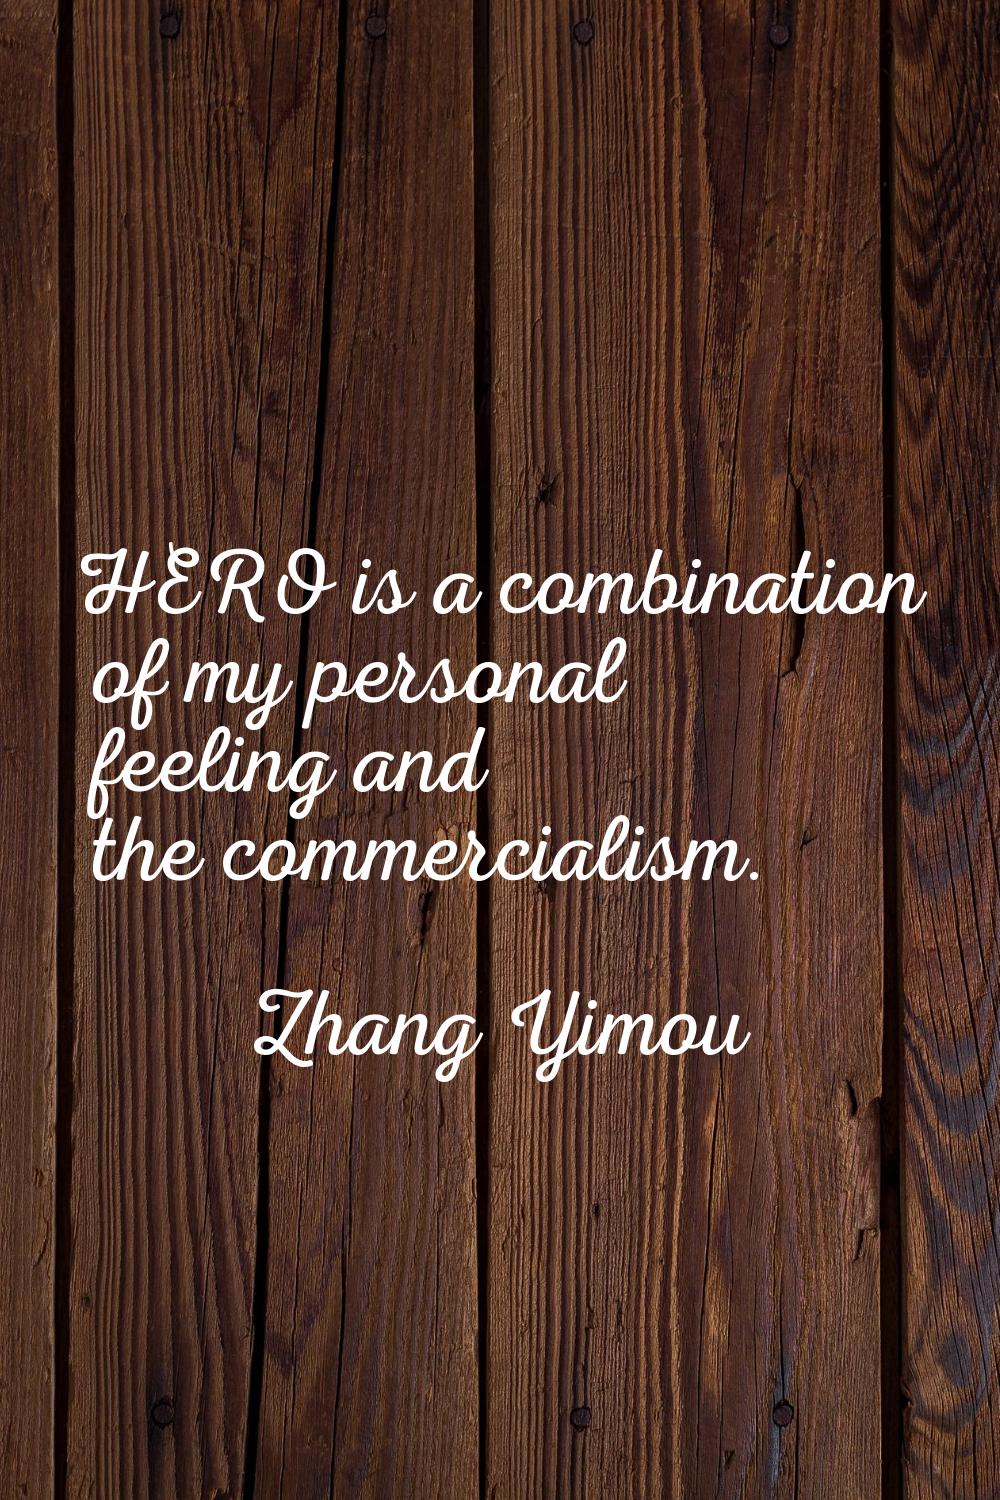 HERO is a combination of my personal feeling and the commercialism.